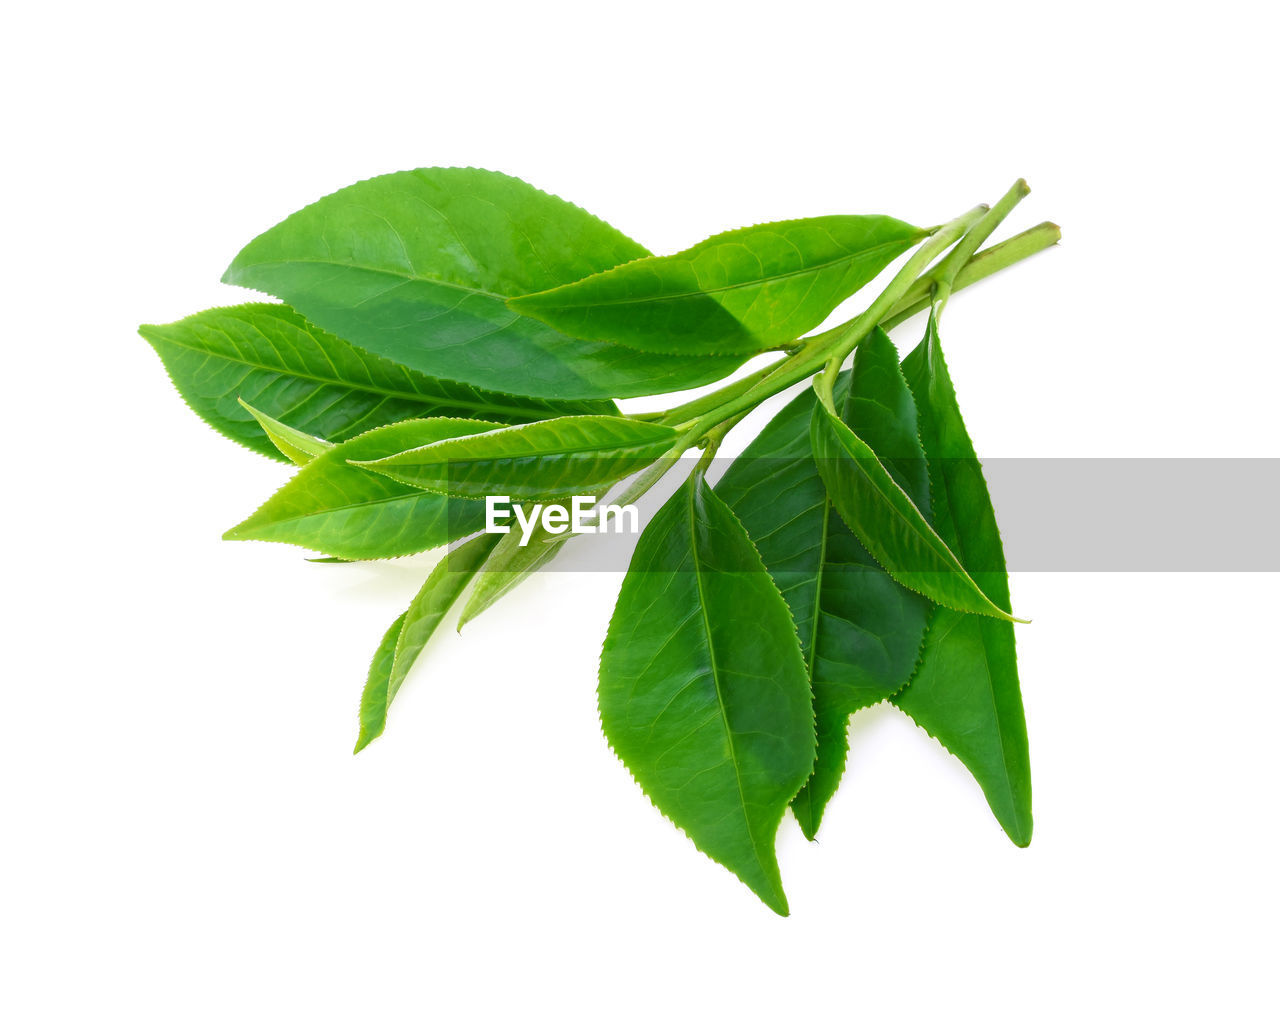 CLOSE-UP OF GREEN LEAVES ON WHITE BACKGROUND